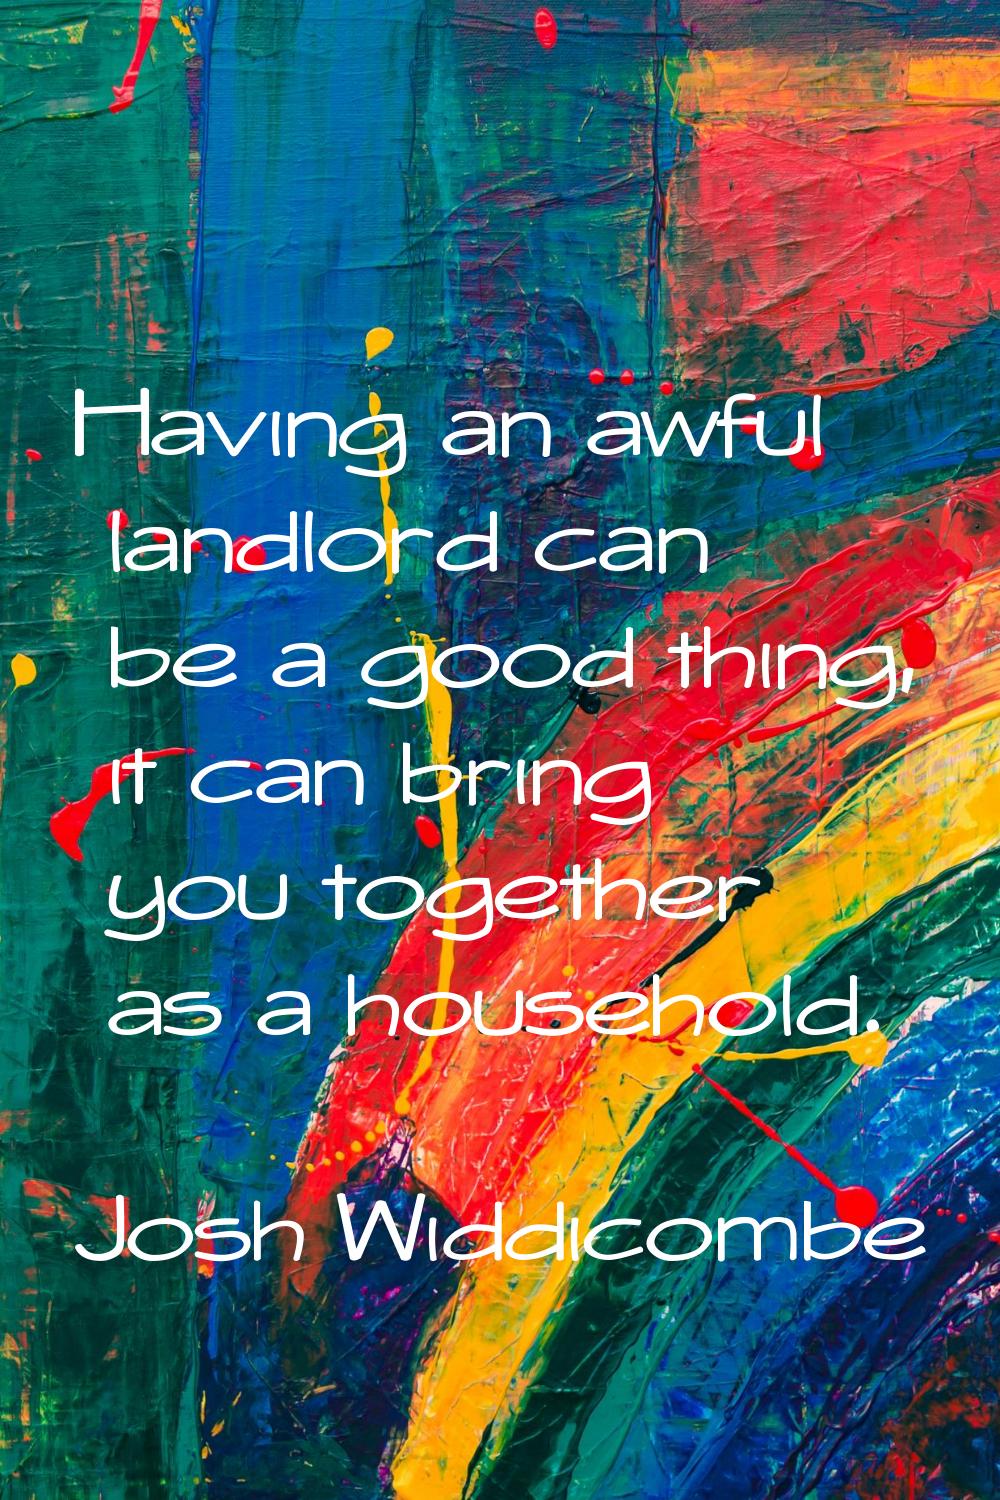 Having an awful landlord can be a good thing, it can bring you together as a household.